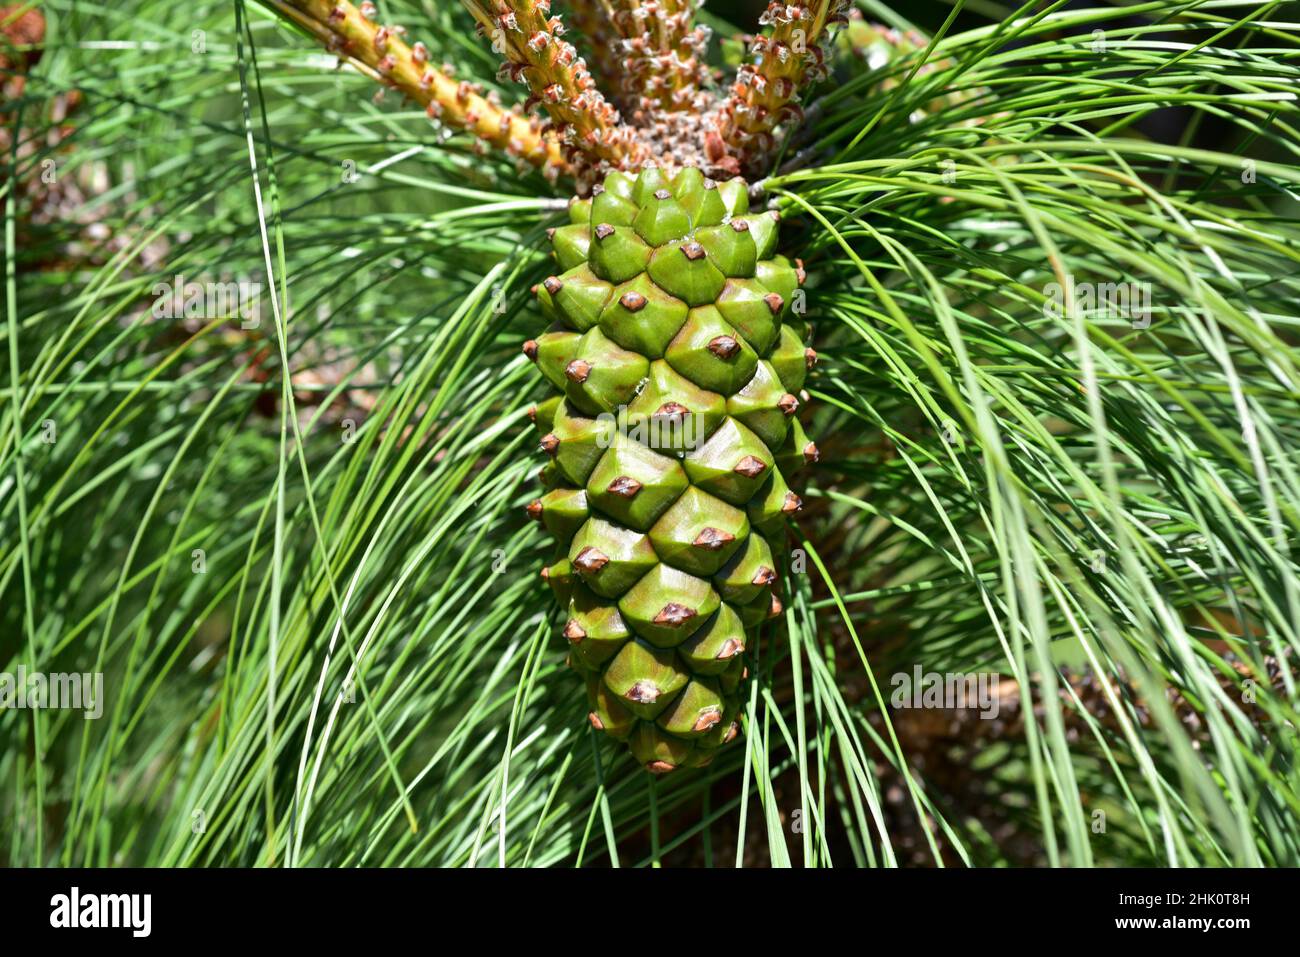 Pino canario (Pinus canariensis) is an evergreen tree endemic to Canary Islands except Lanzarote and Fuerteventura. Pinecone and leaves detail. Stock Photo